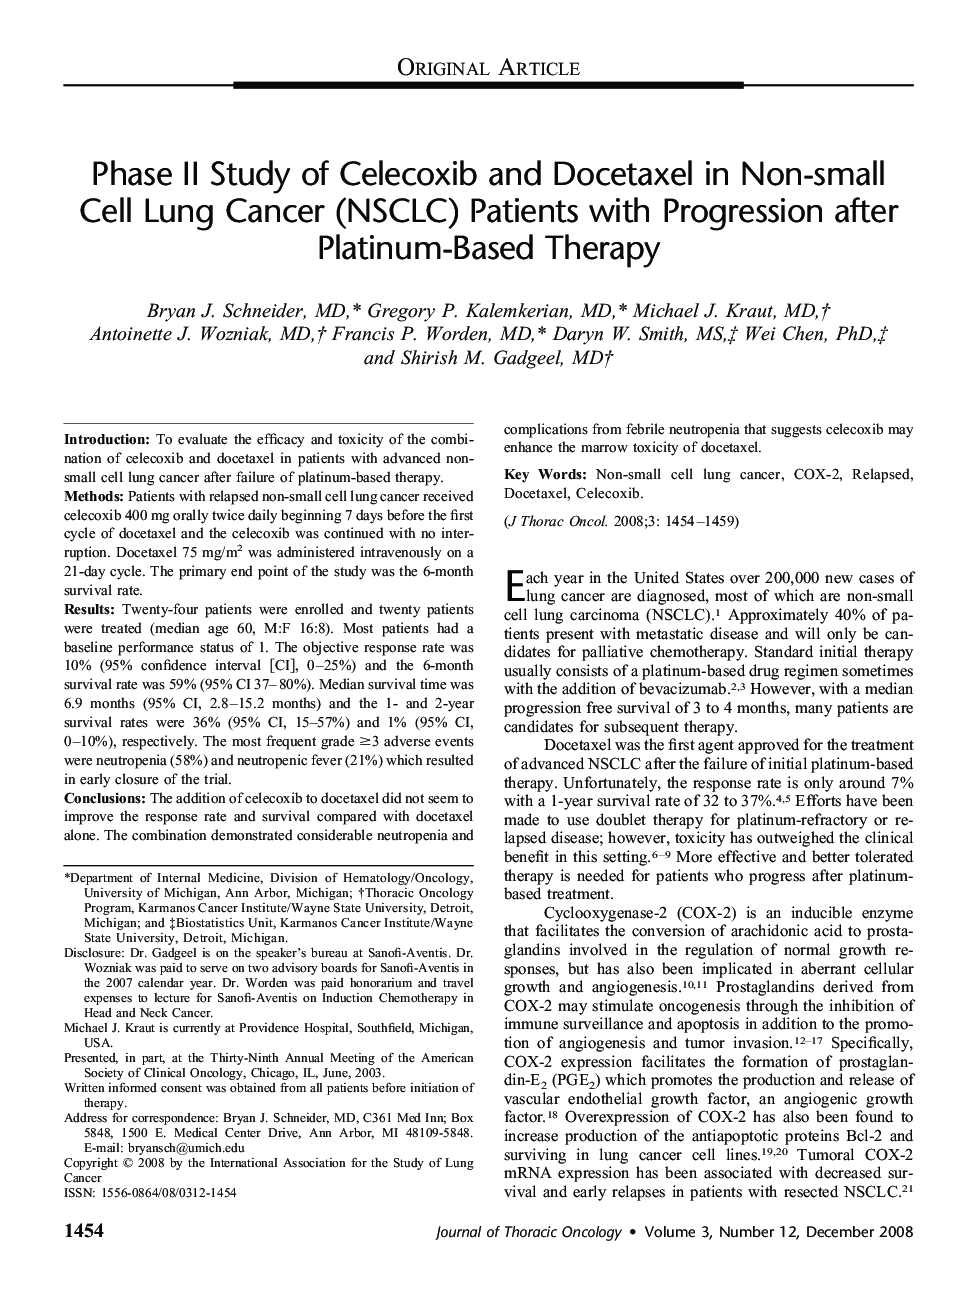 Phase II Study of Celecoxib and Docetaxel in Non-small Cell Lung Cancer (NSCLC) Patients with Progression after Platinum-Based Therapy 